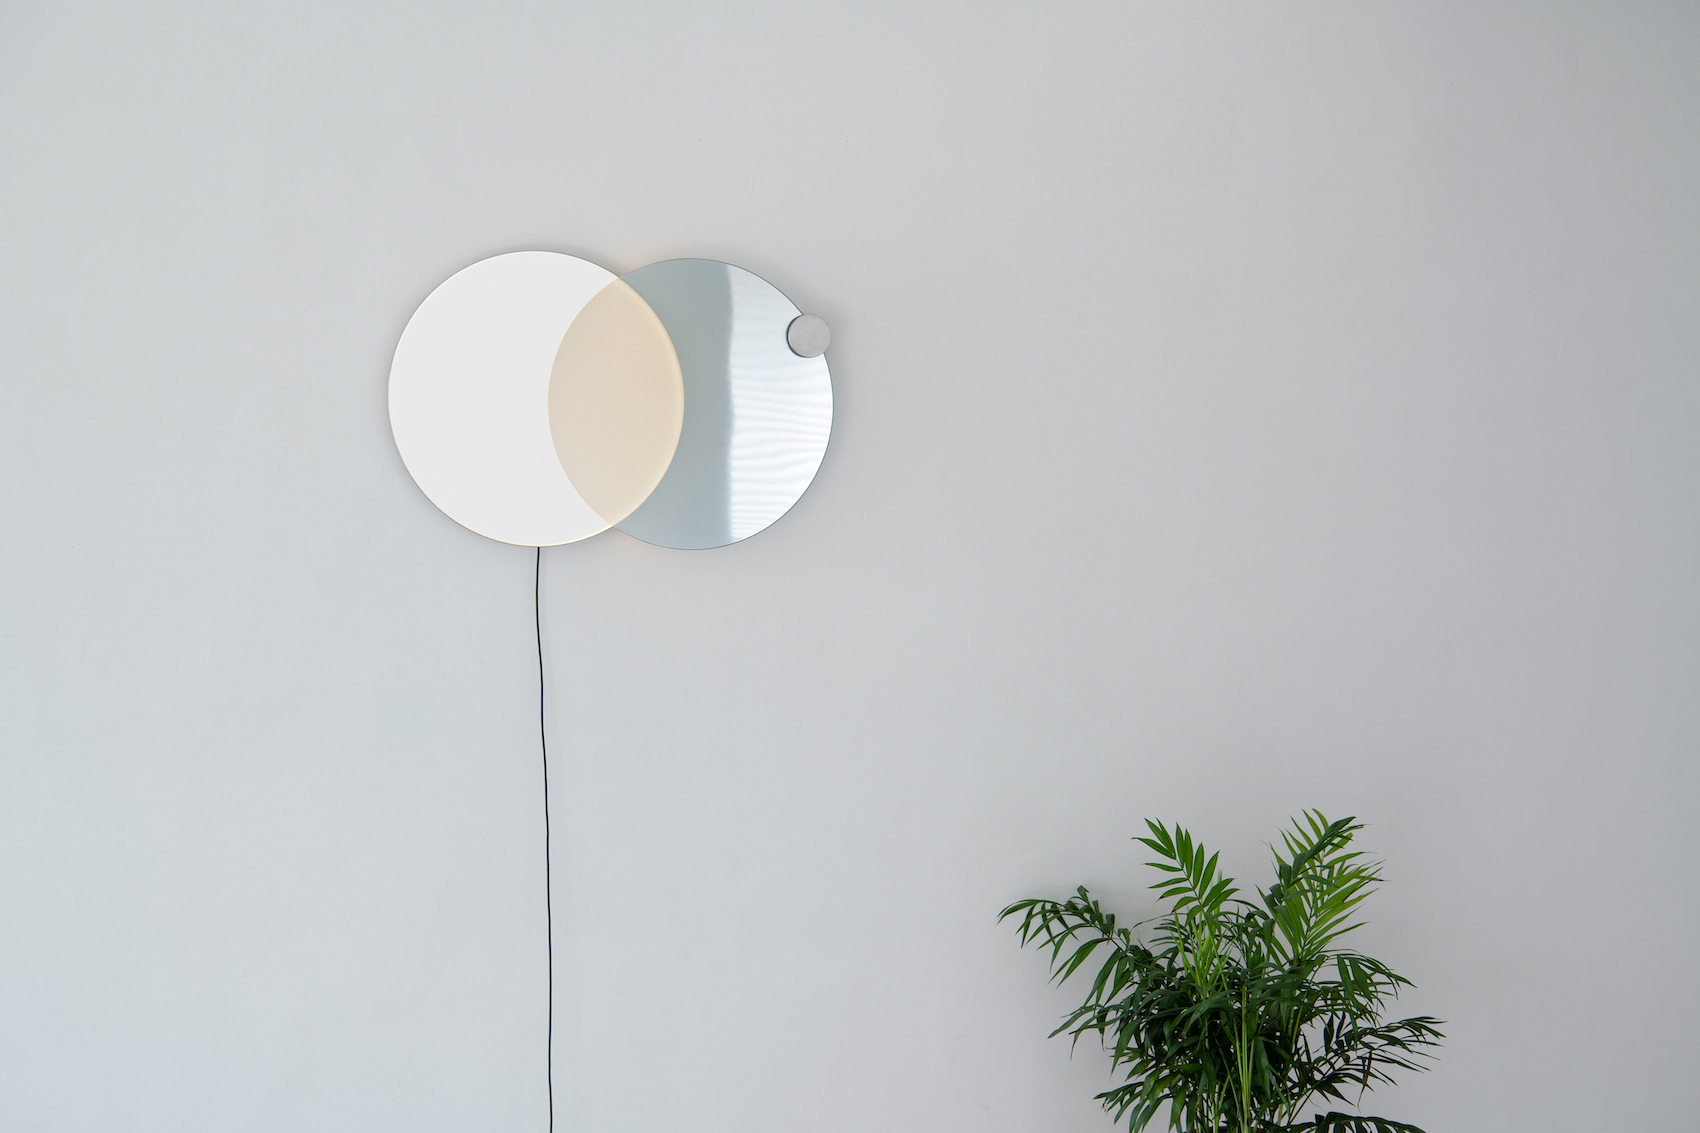 Minimalist Lamp and Mirror Combination "Eclipse" by Atelier JM